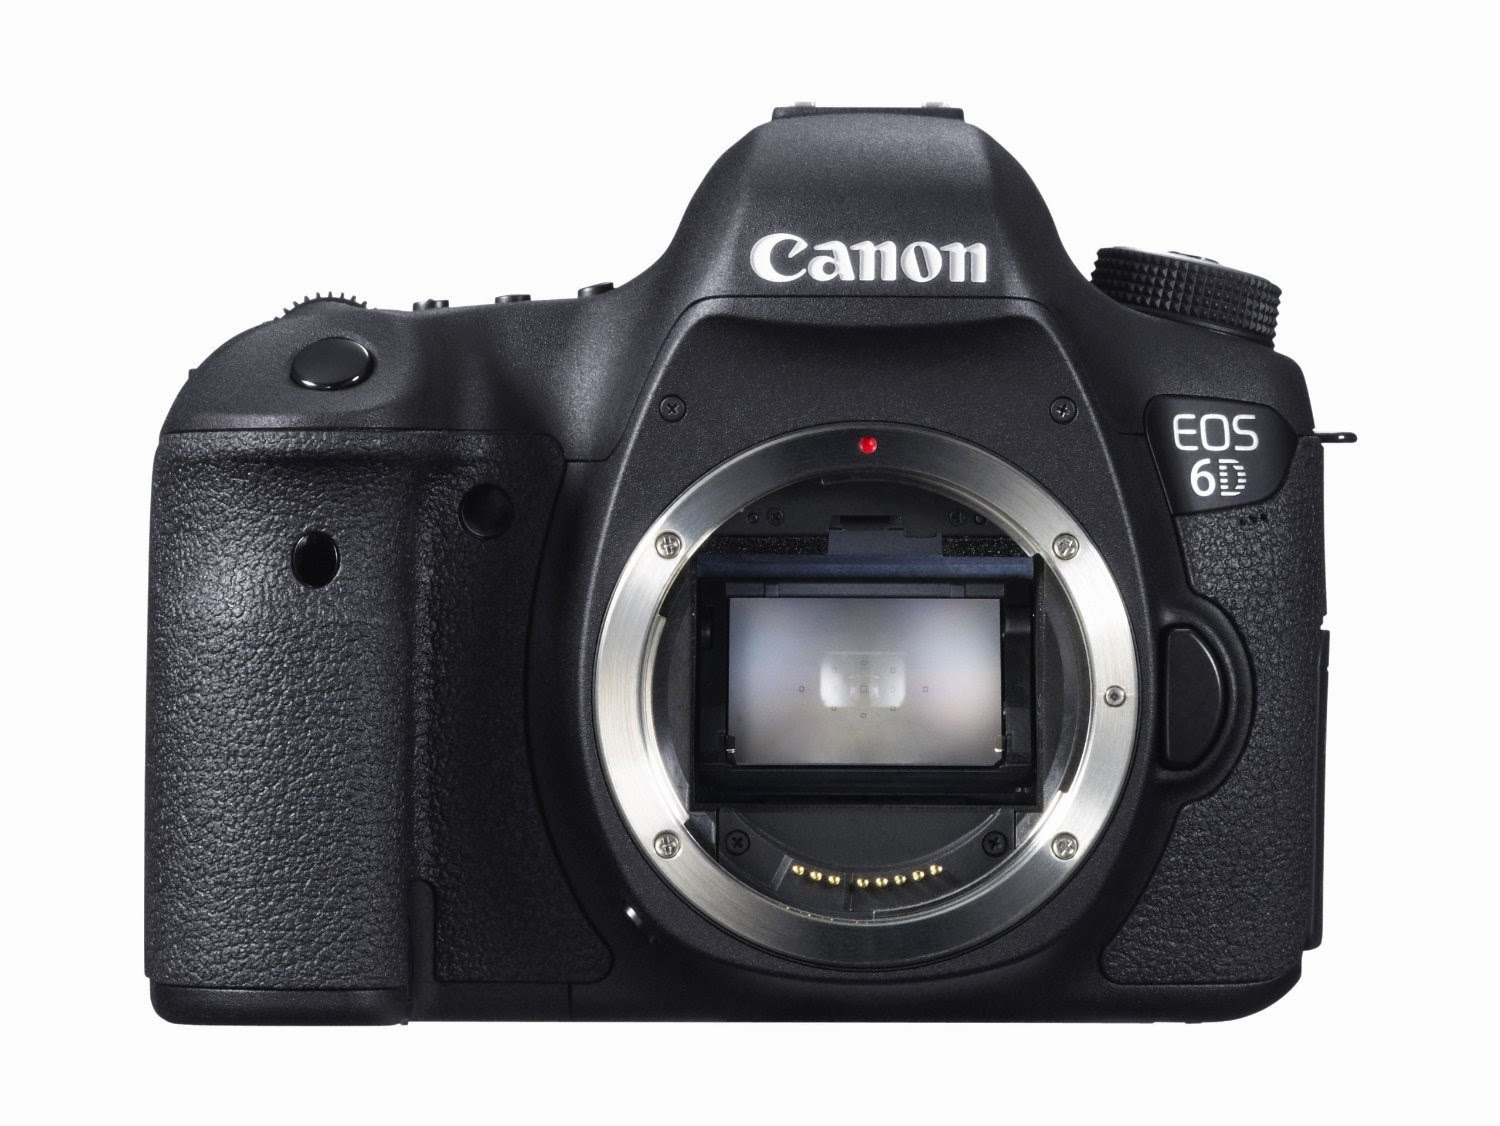 Canon EOS 6D 20.2 MP CMOS Digital SLR camera, review, compact and lightweight, quality images even in low light, full frame capture